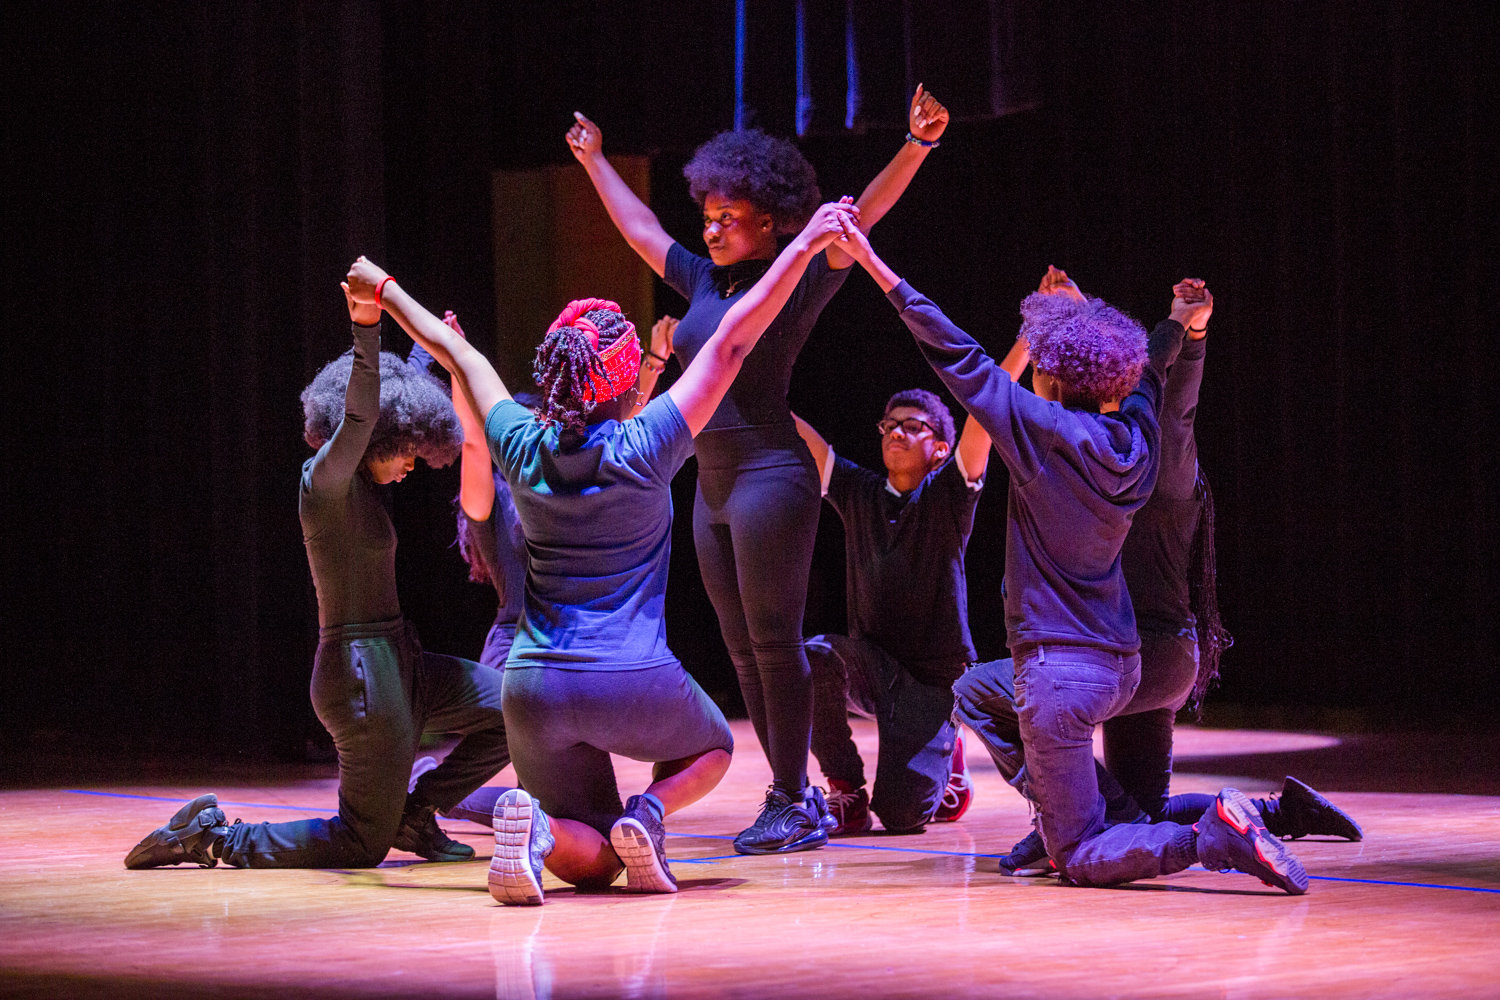 Students perform Beyoncé’s ‘Lift Every Voice & Sing’ for the Marble Hill School for International Studies’ second annual Black History Show, organized by the school’s new Black Student Union.